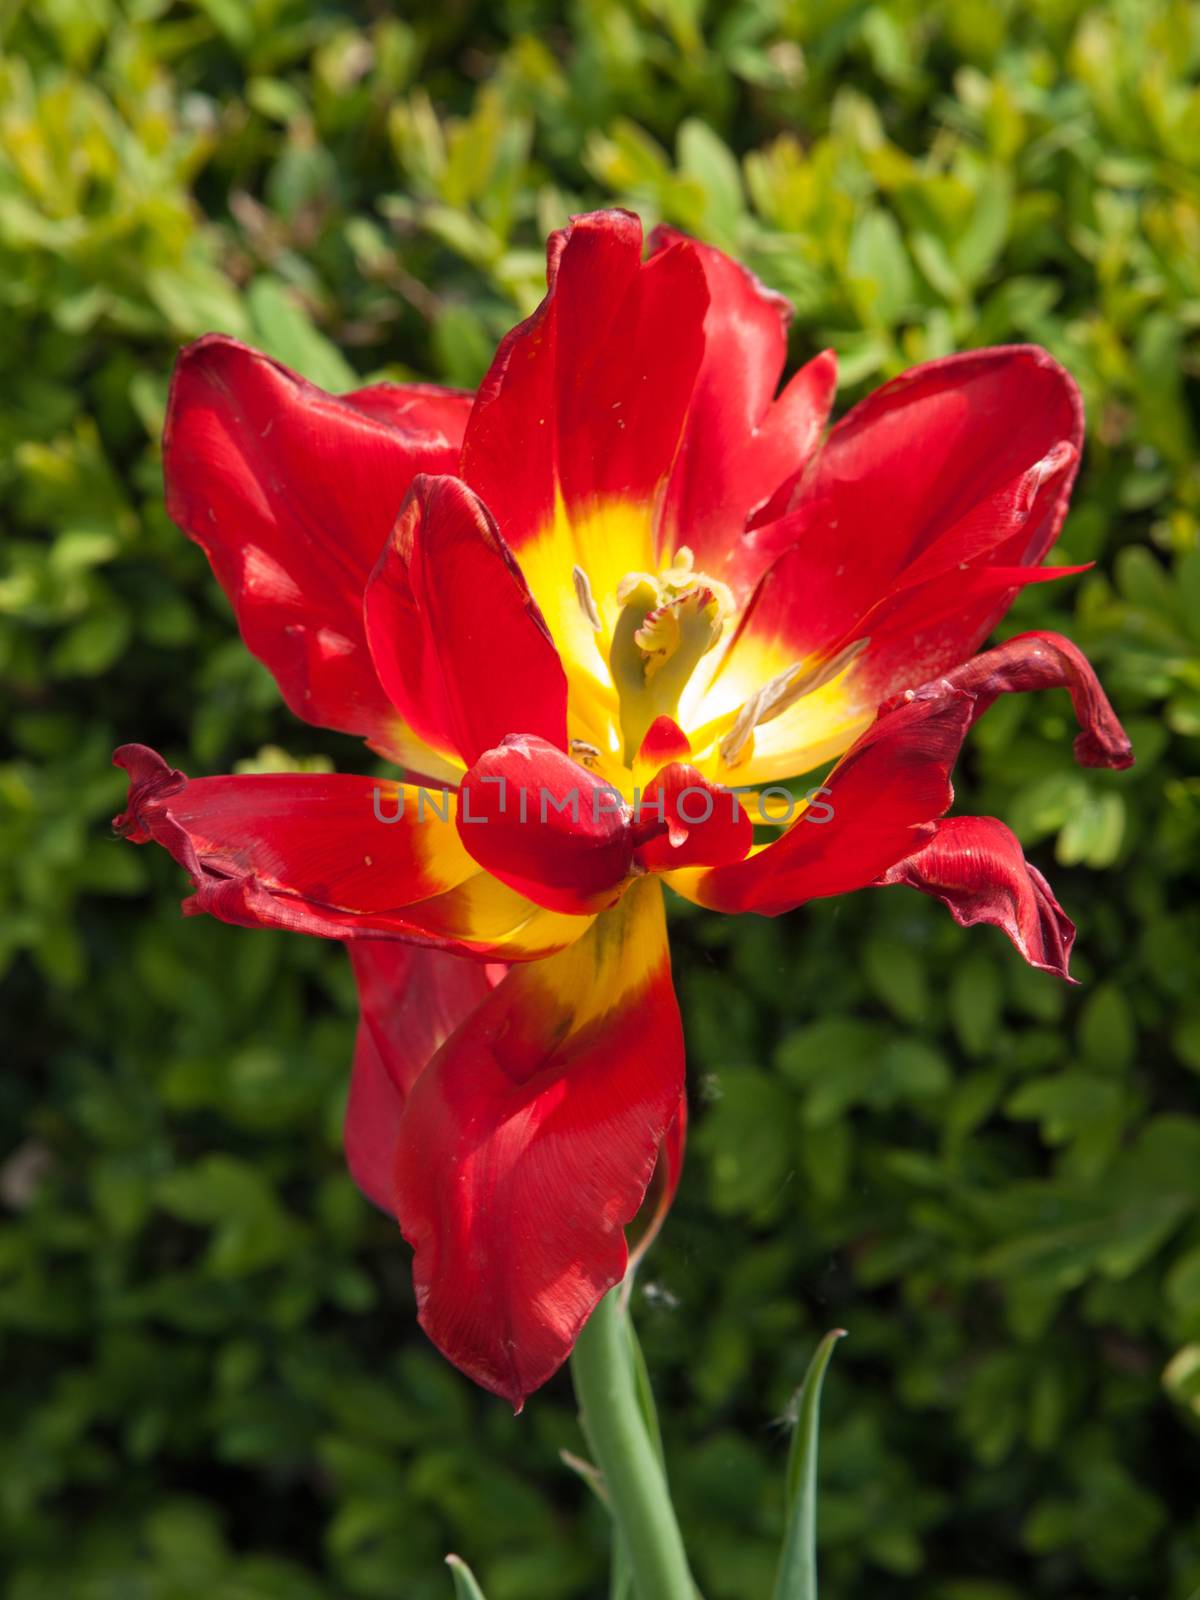 Large red-yellow bloom in the spring garden